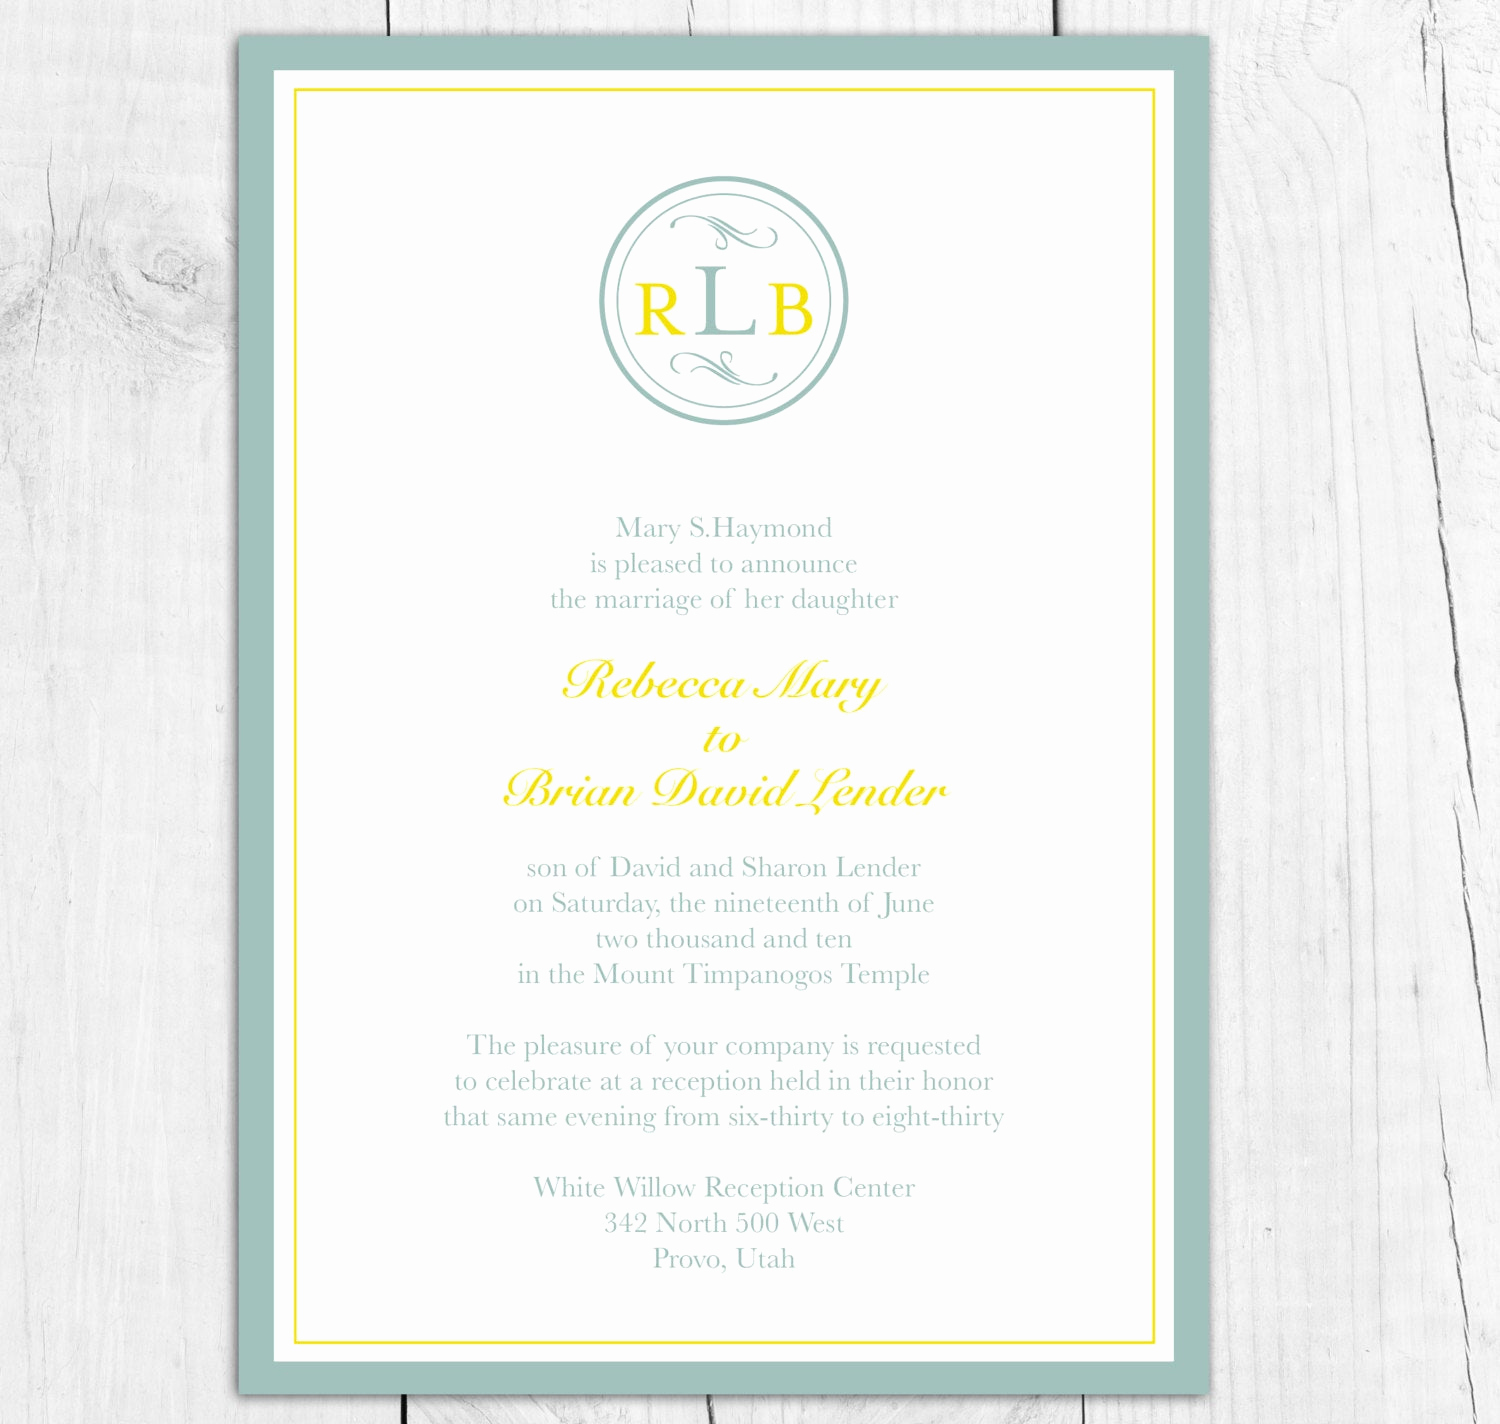 Lds Sealing Invitation Wording Fresh Lds Temple Wedding Invitation Announcement by